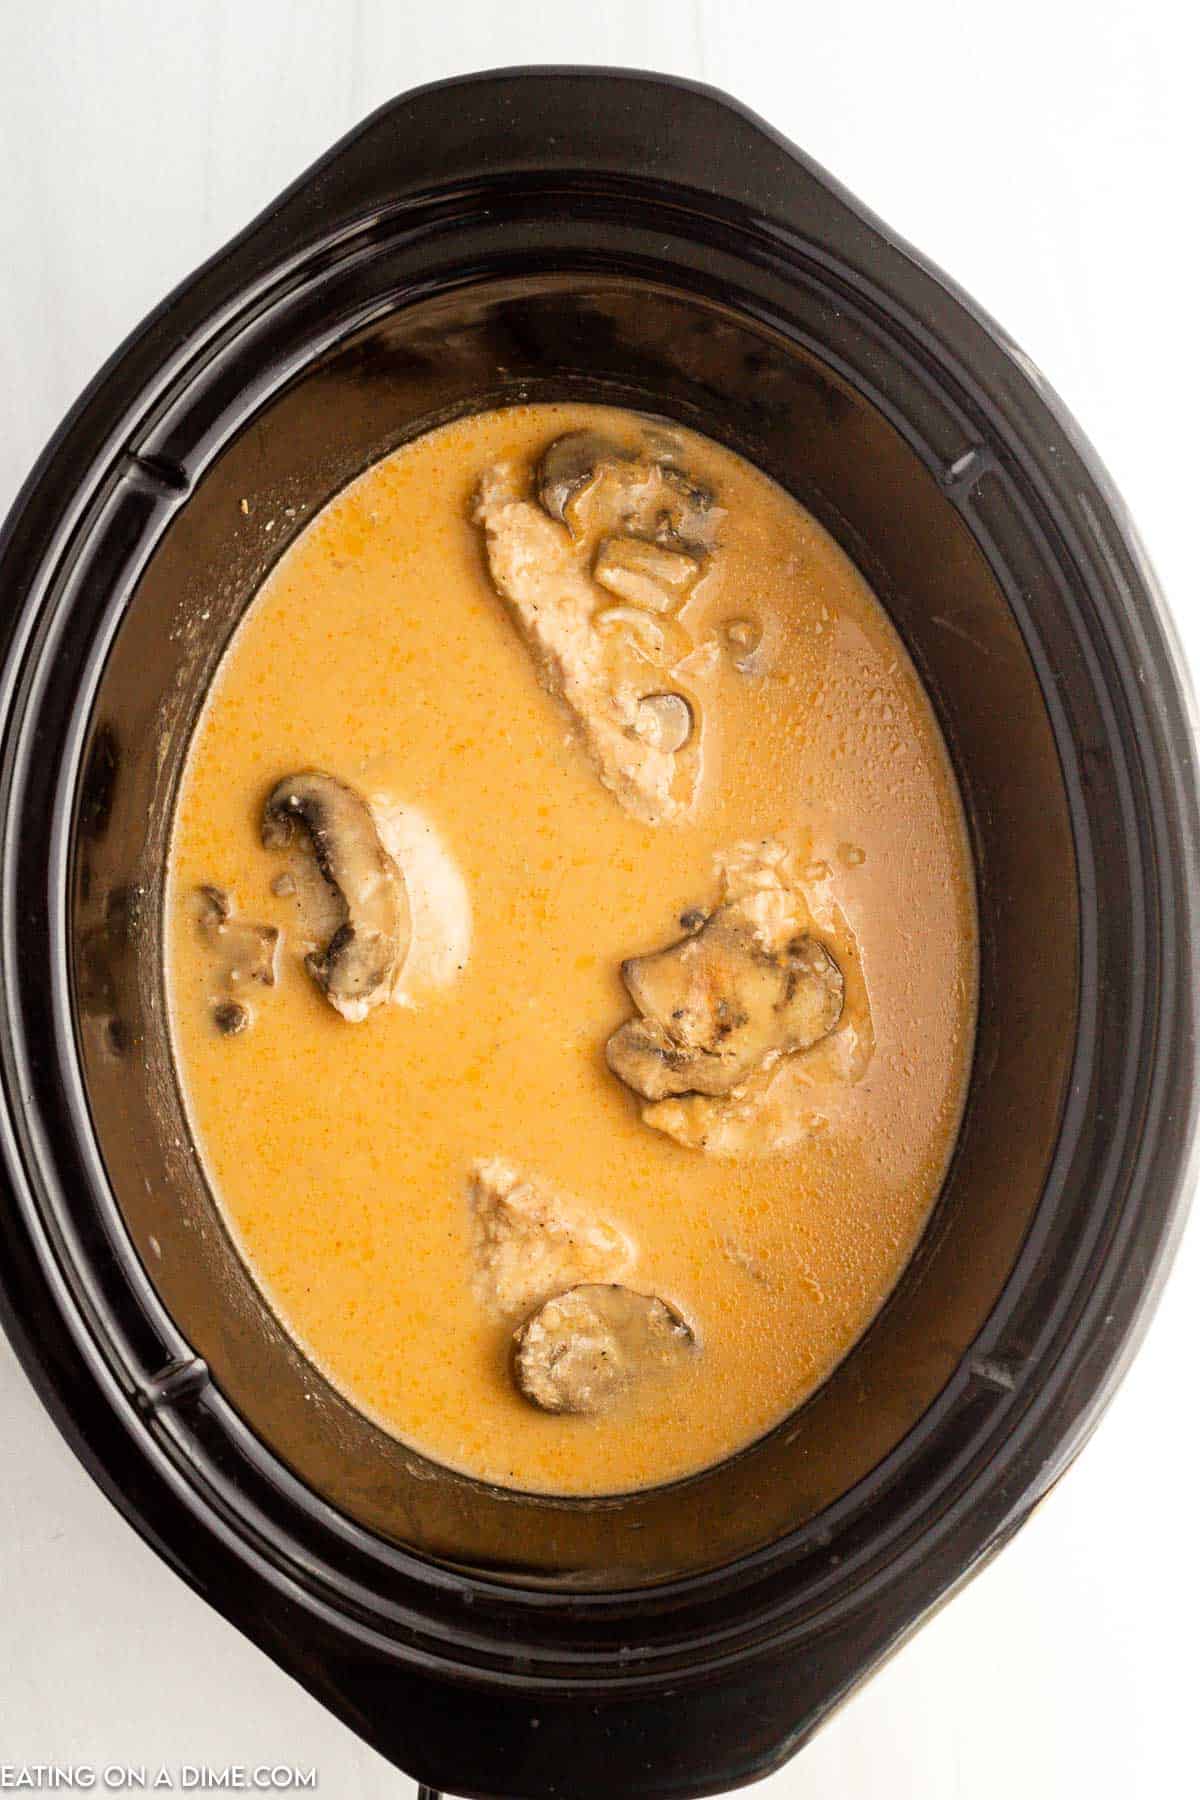 Pork chops and mushrooms in the slow cooker in a creamy broth